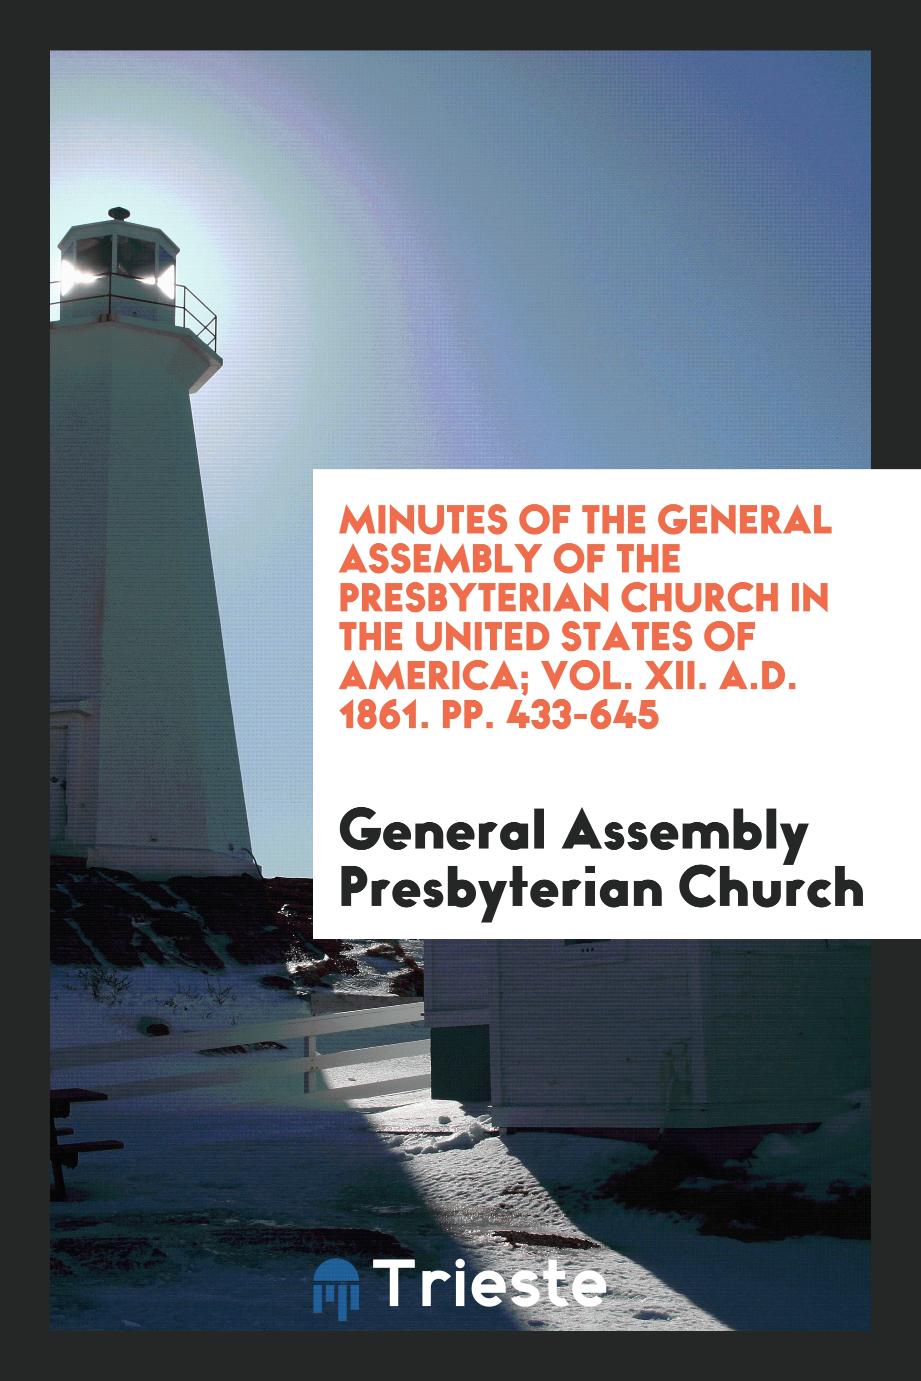 Minutes of the General Assembly of the Presbyterian Church in the United States of America; Vol. XII. A.D. 1861. pp. 433-645